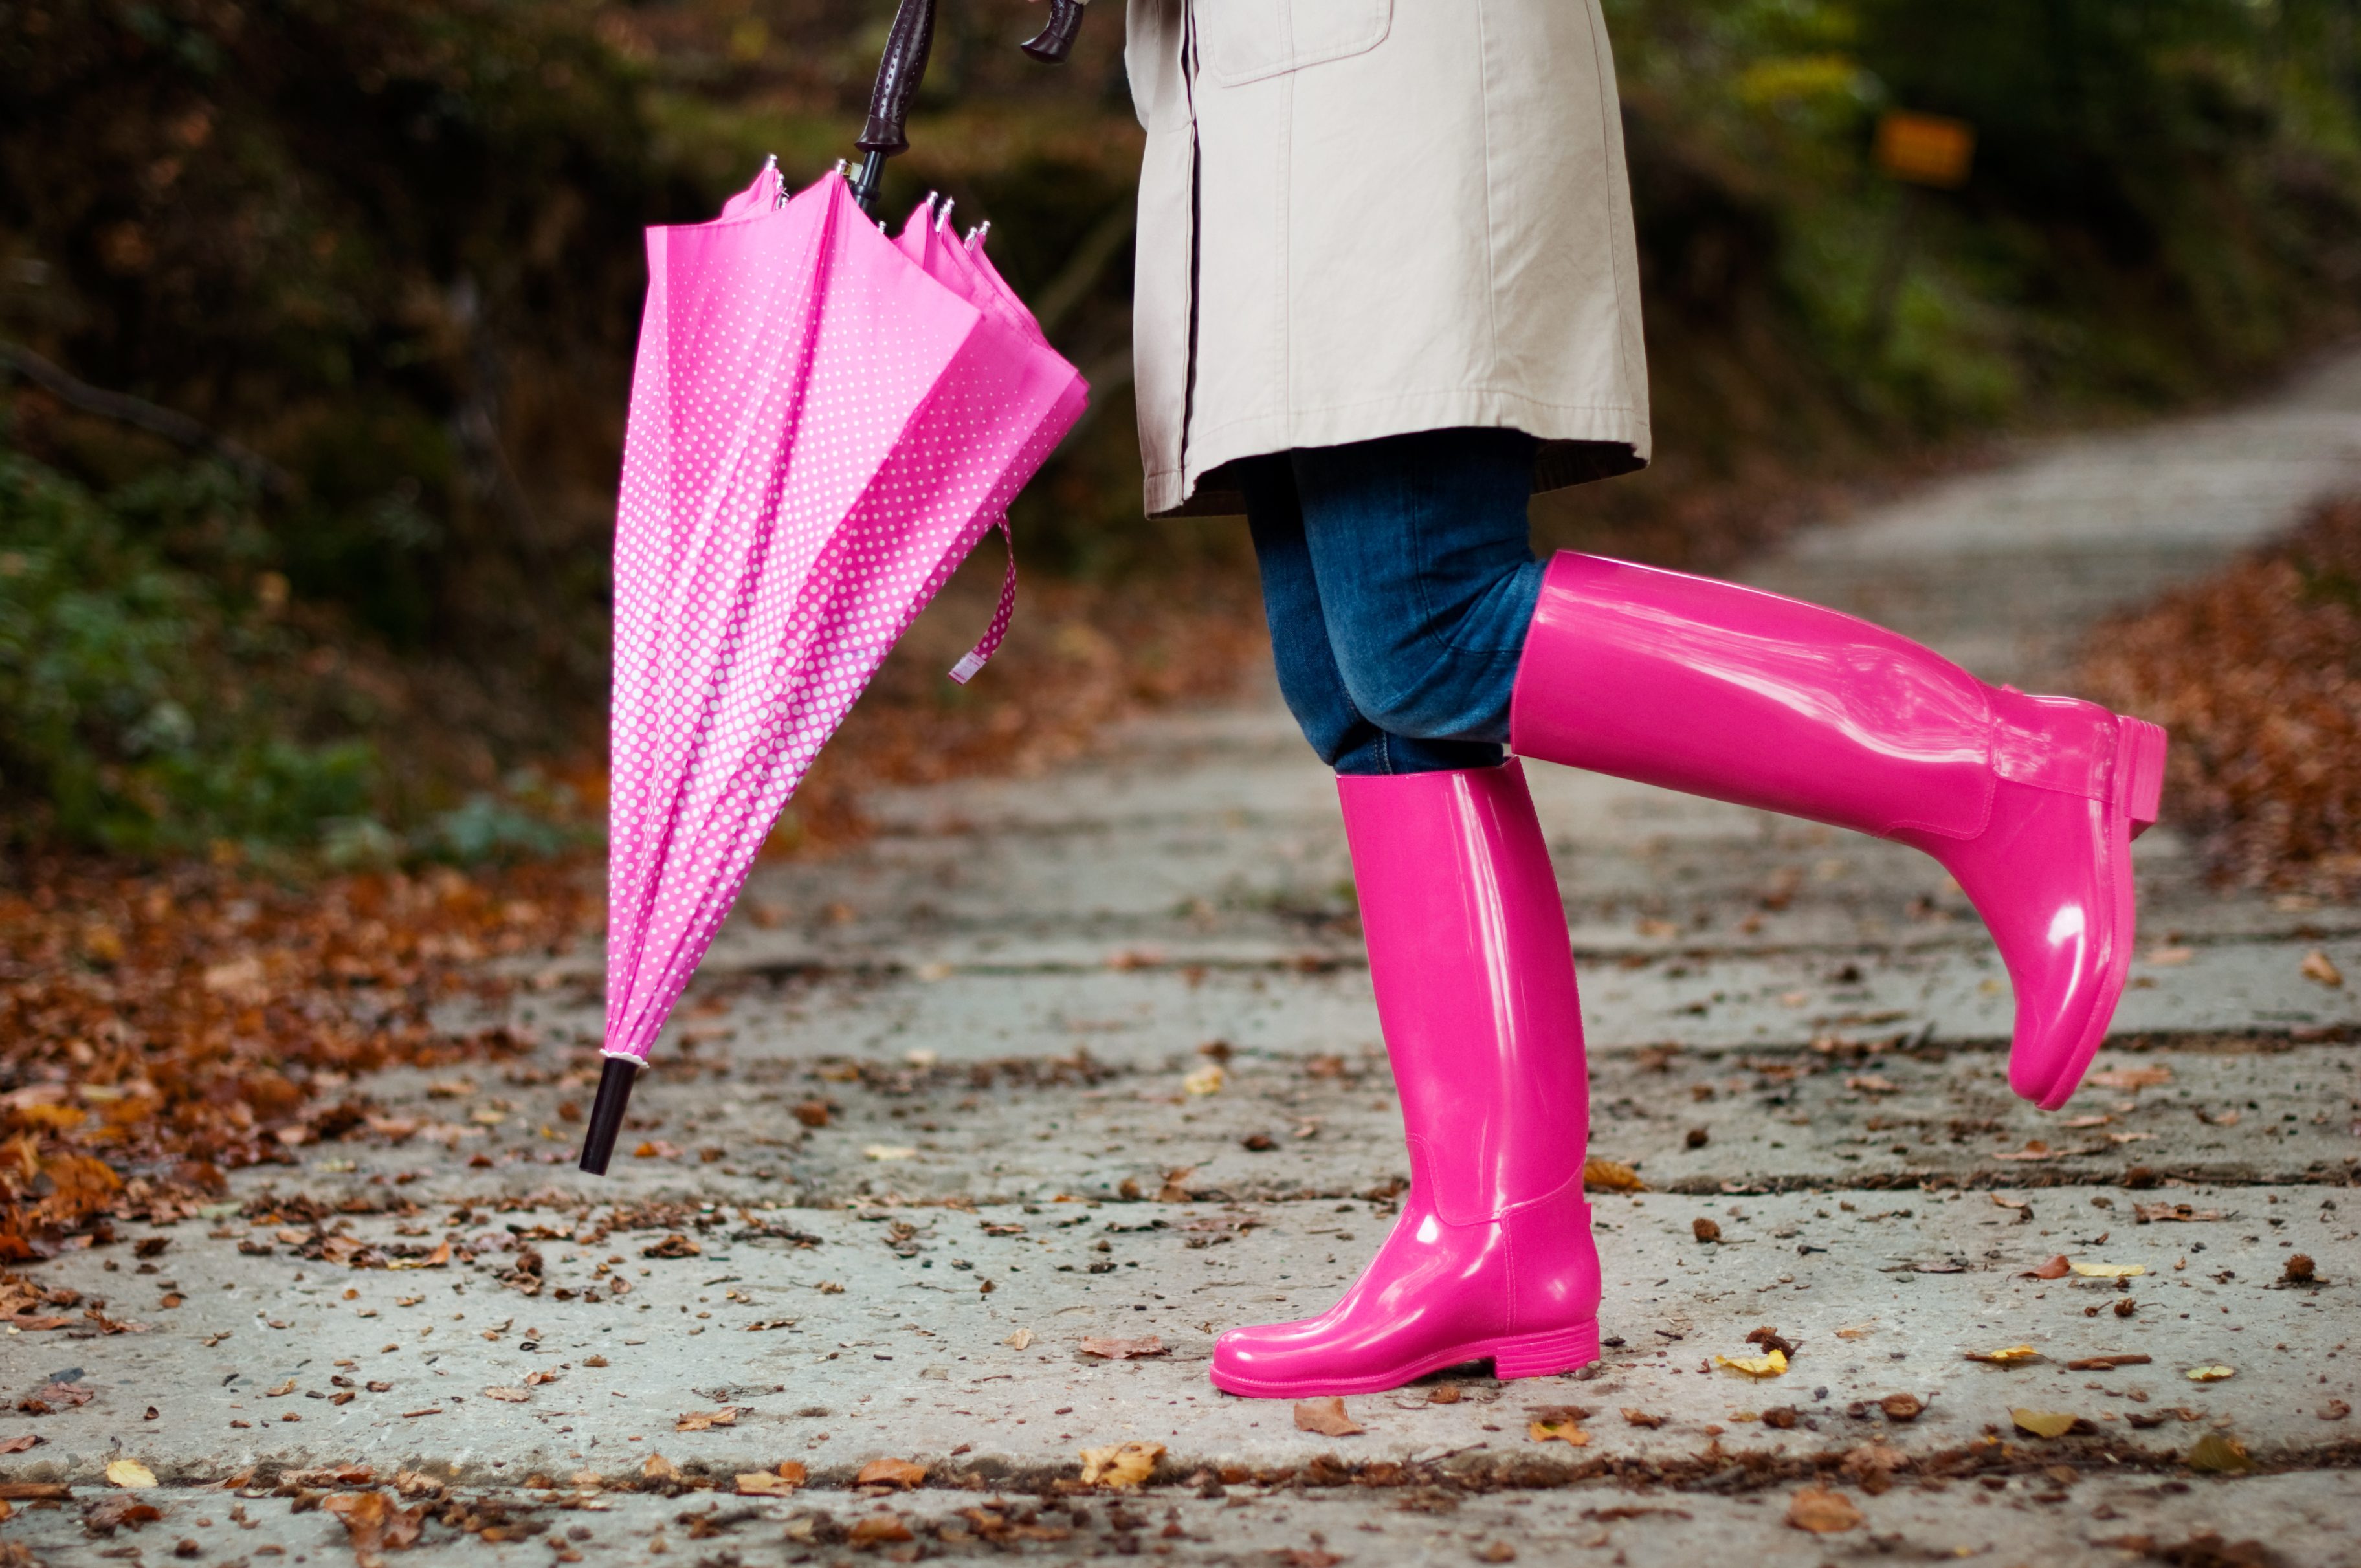 Trench Coats, and Rain Boots